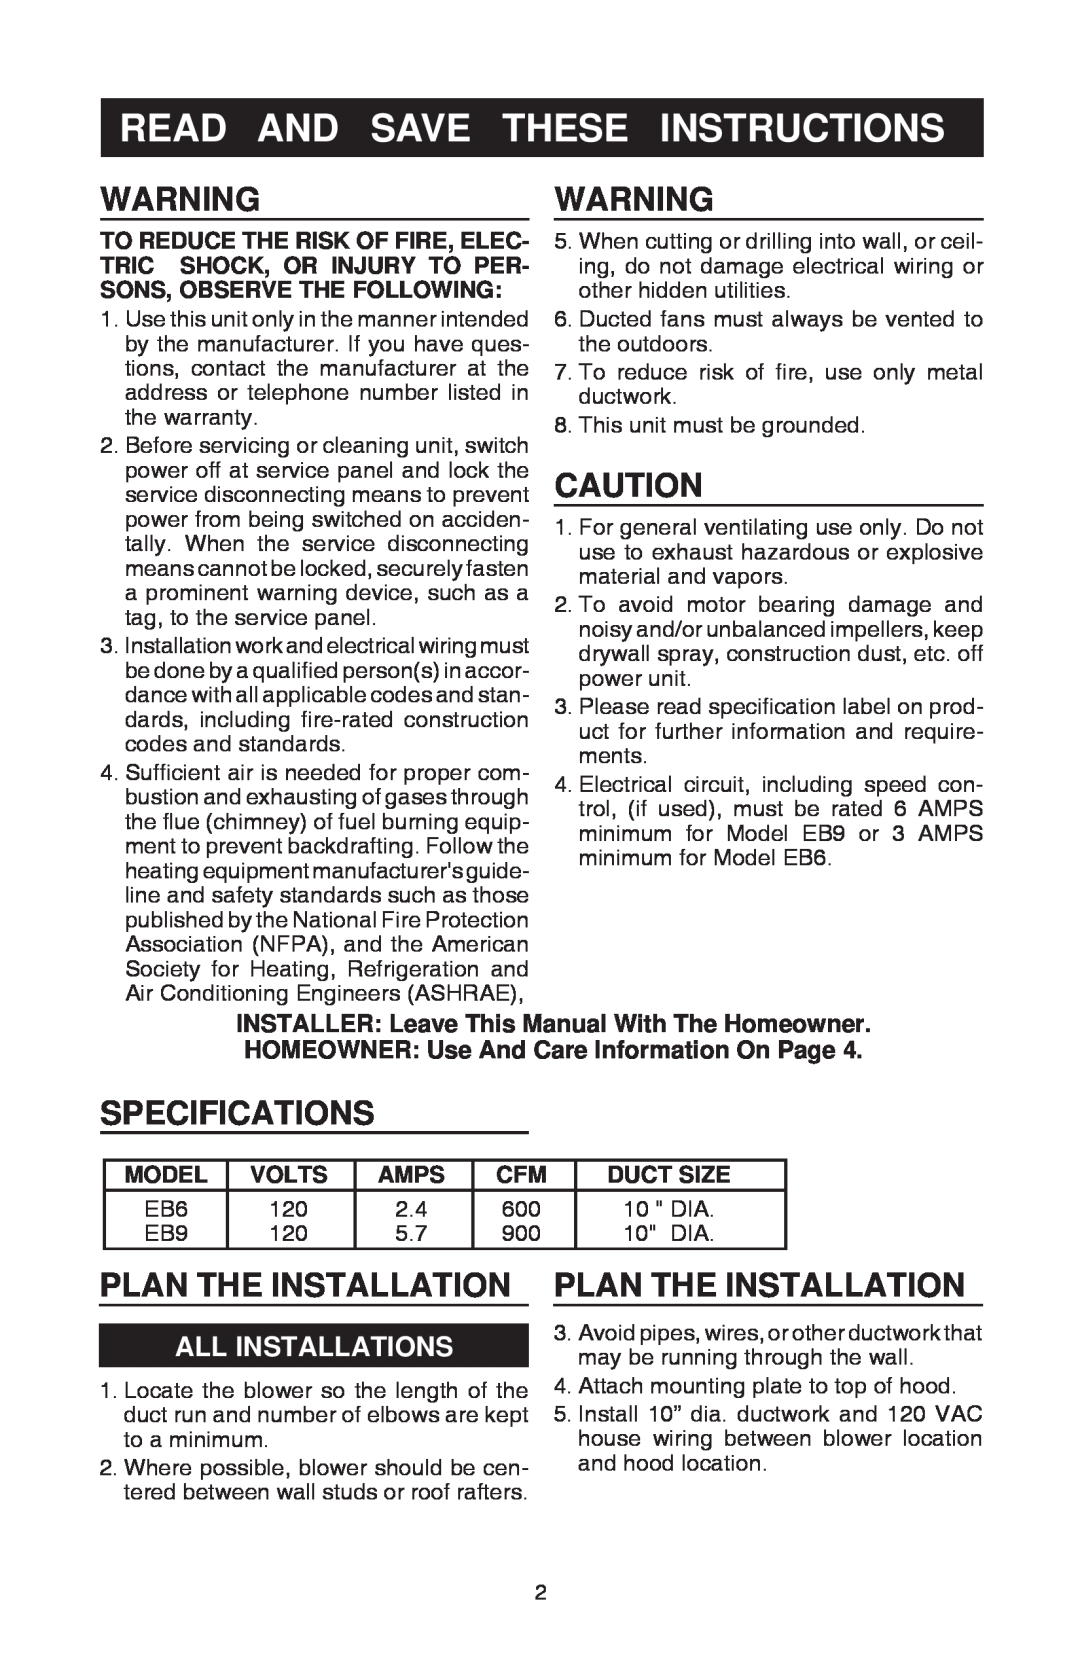 Best EB9, EB6 manual Read And Save These Instructions, Specifications, Plan The Installation, All Installations 